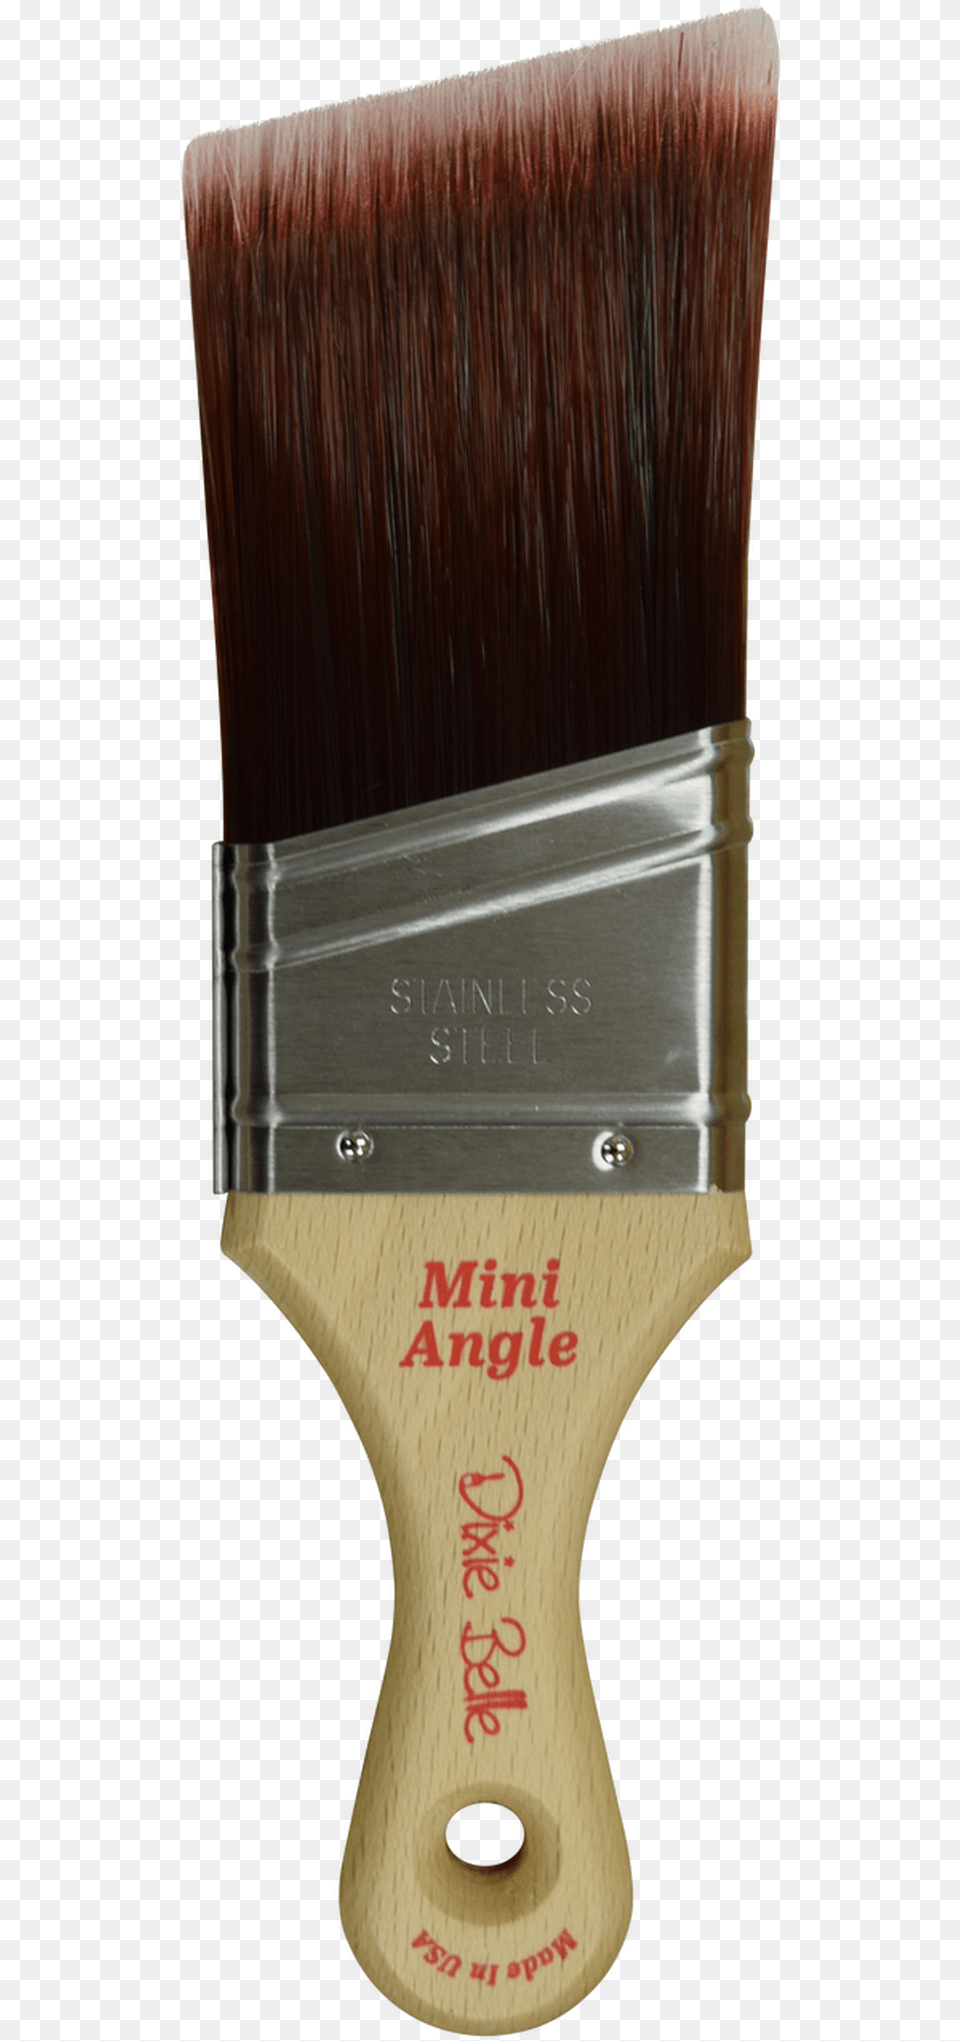 Dbp Mini Angle Synthetic Brush Paint Brush, Device, Tool, Ping Pong, Ping Pong Paddle Free Png Download